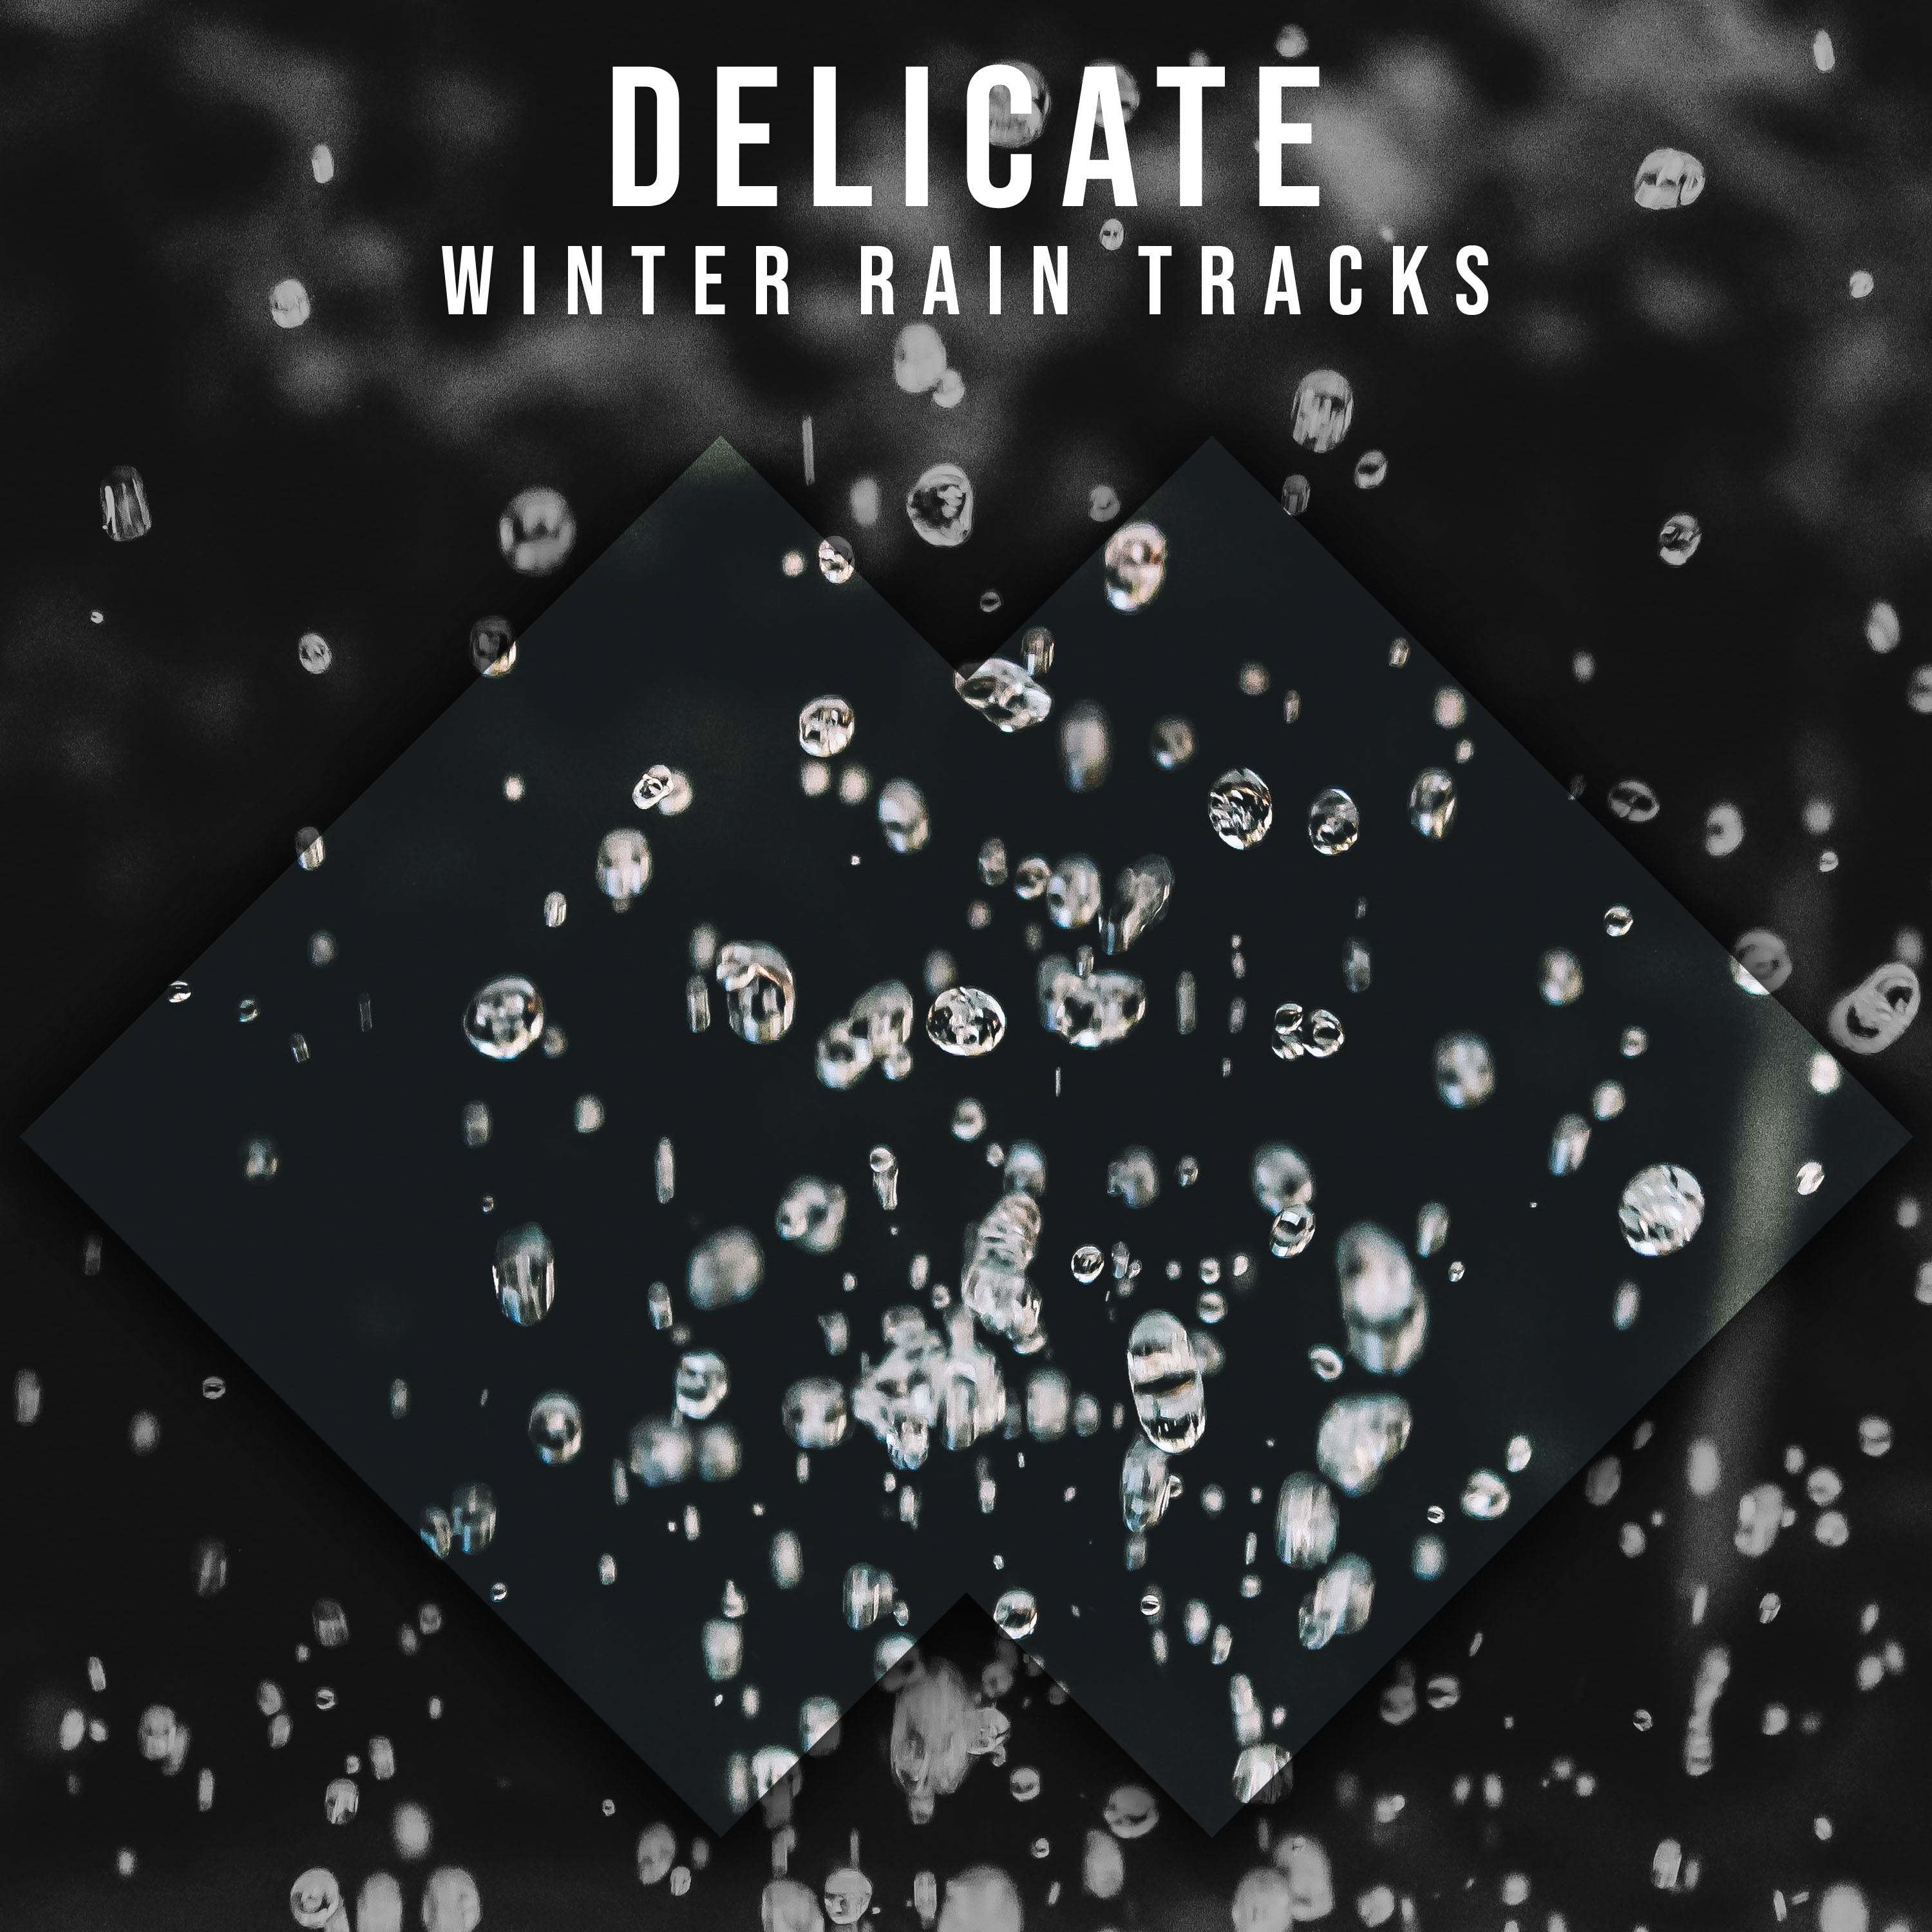 #15 Delicate Winter Rain Tracks for Sleep and Relaxation